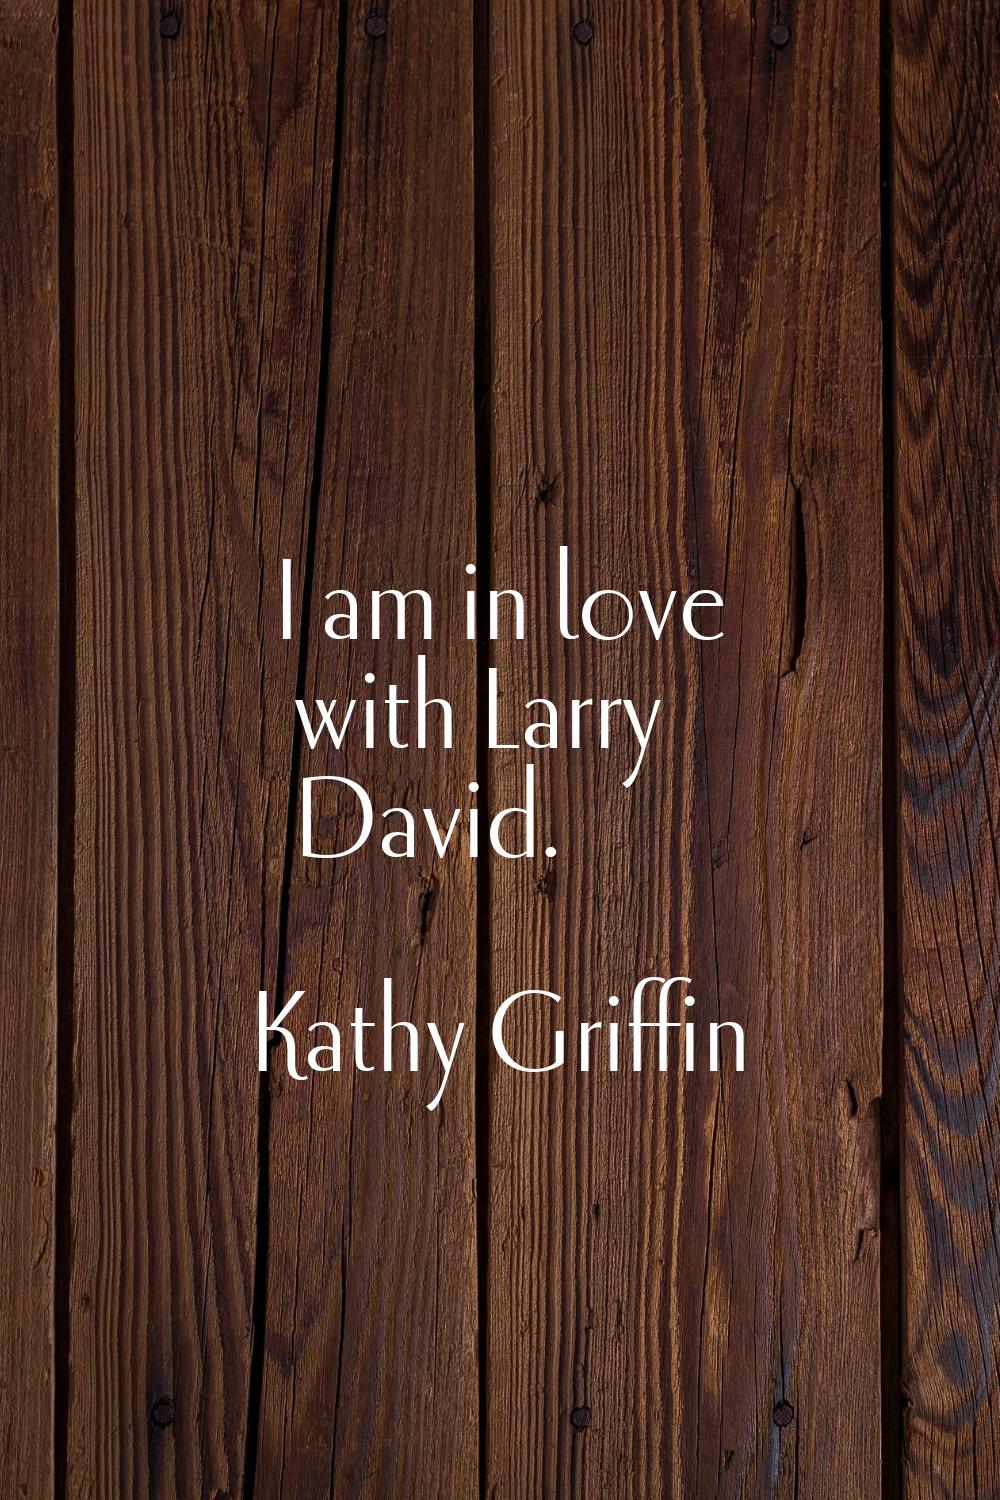 I am in love with Larry David.